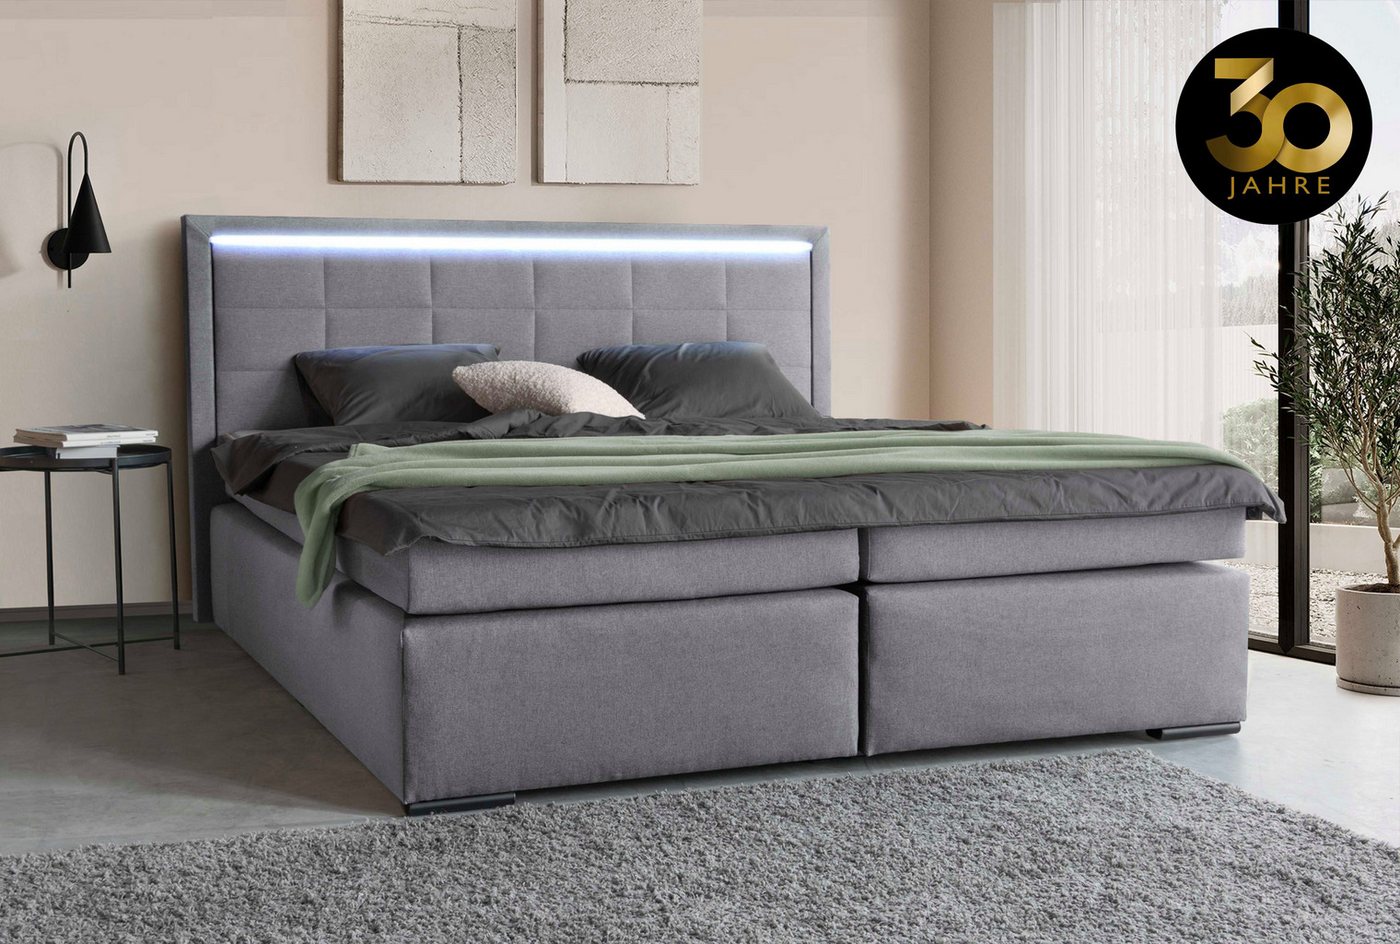 COLLECTION AB Boxspringbett 30 Jahre Jubiläums-Modell Athena, in H2,H3 & H4, inkl. Topper, inkl. LED-Leiste von COLLECTION AB